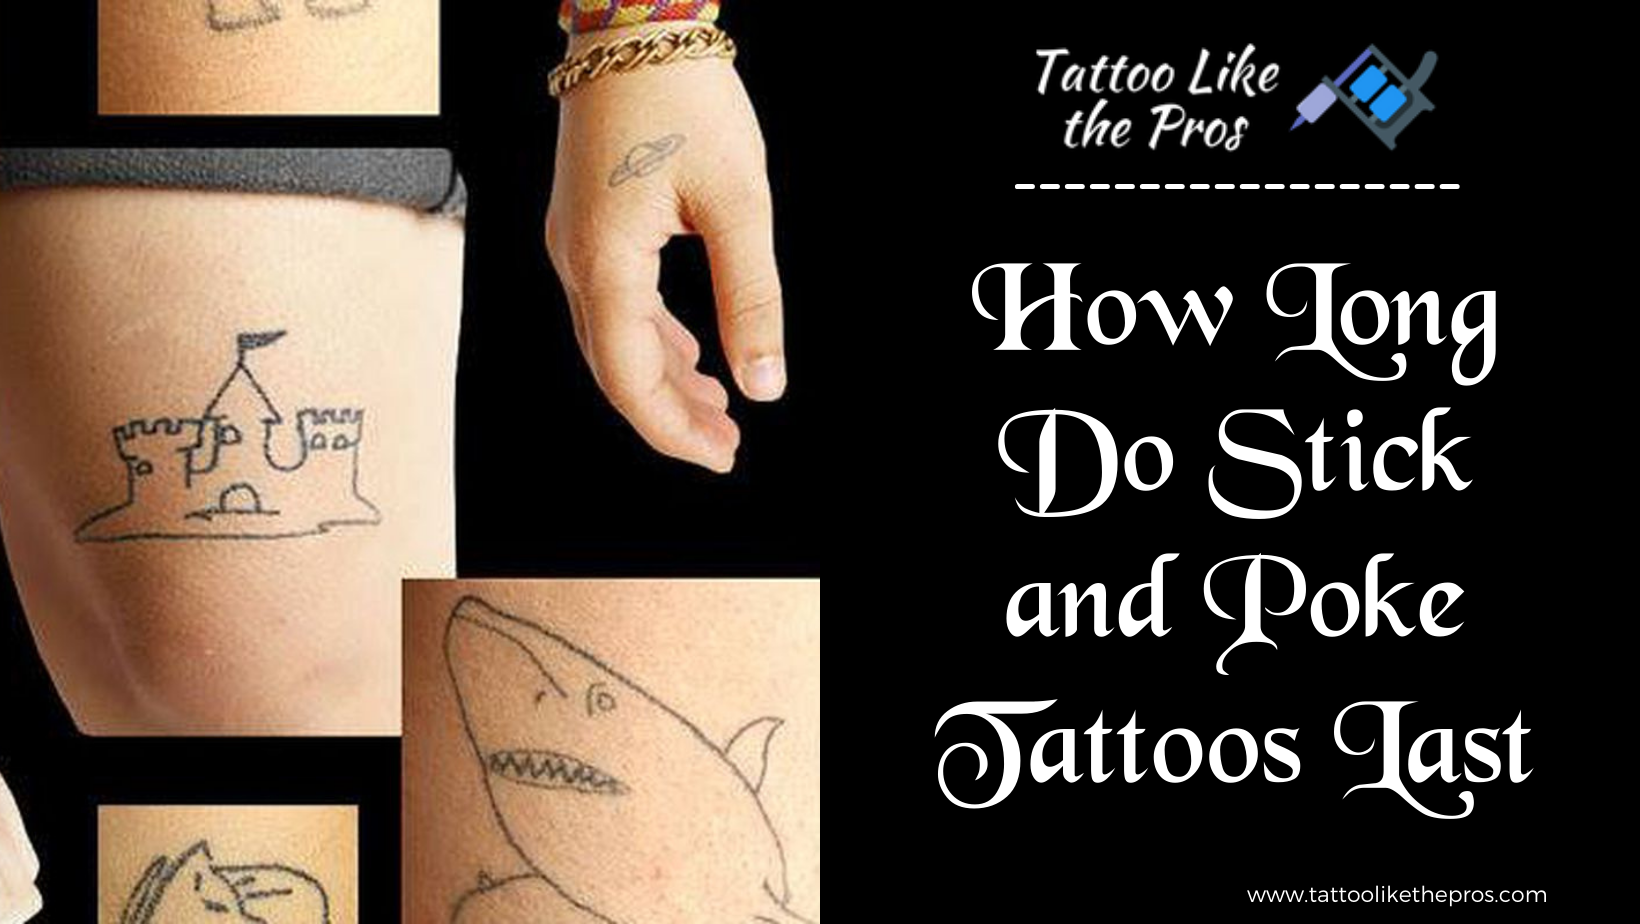 How long does a stick and poke tattoo last